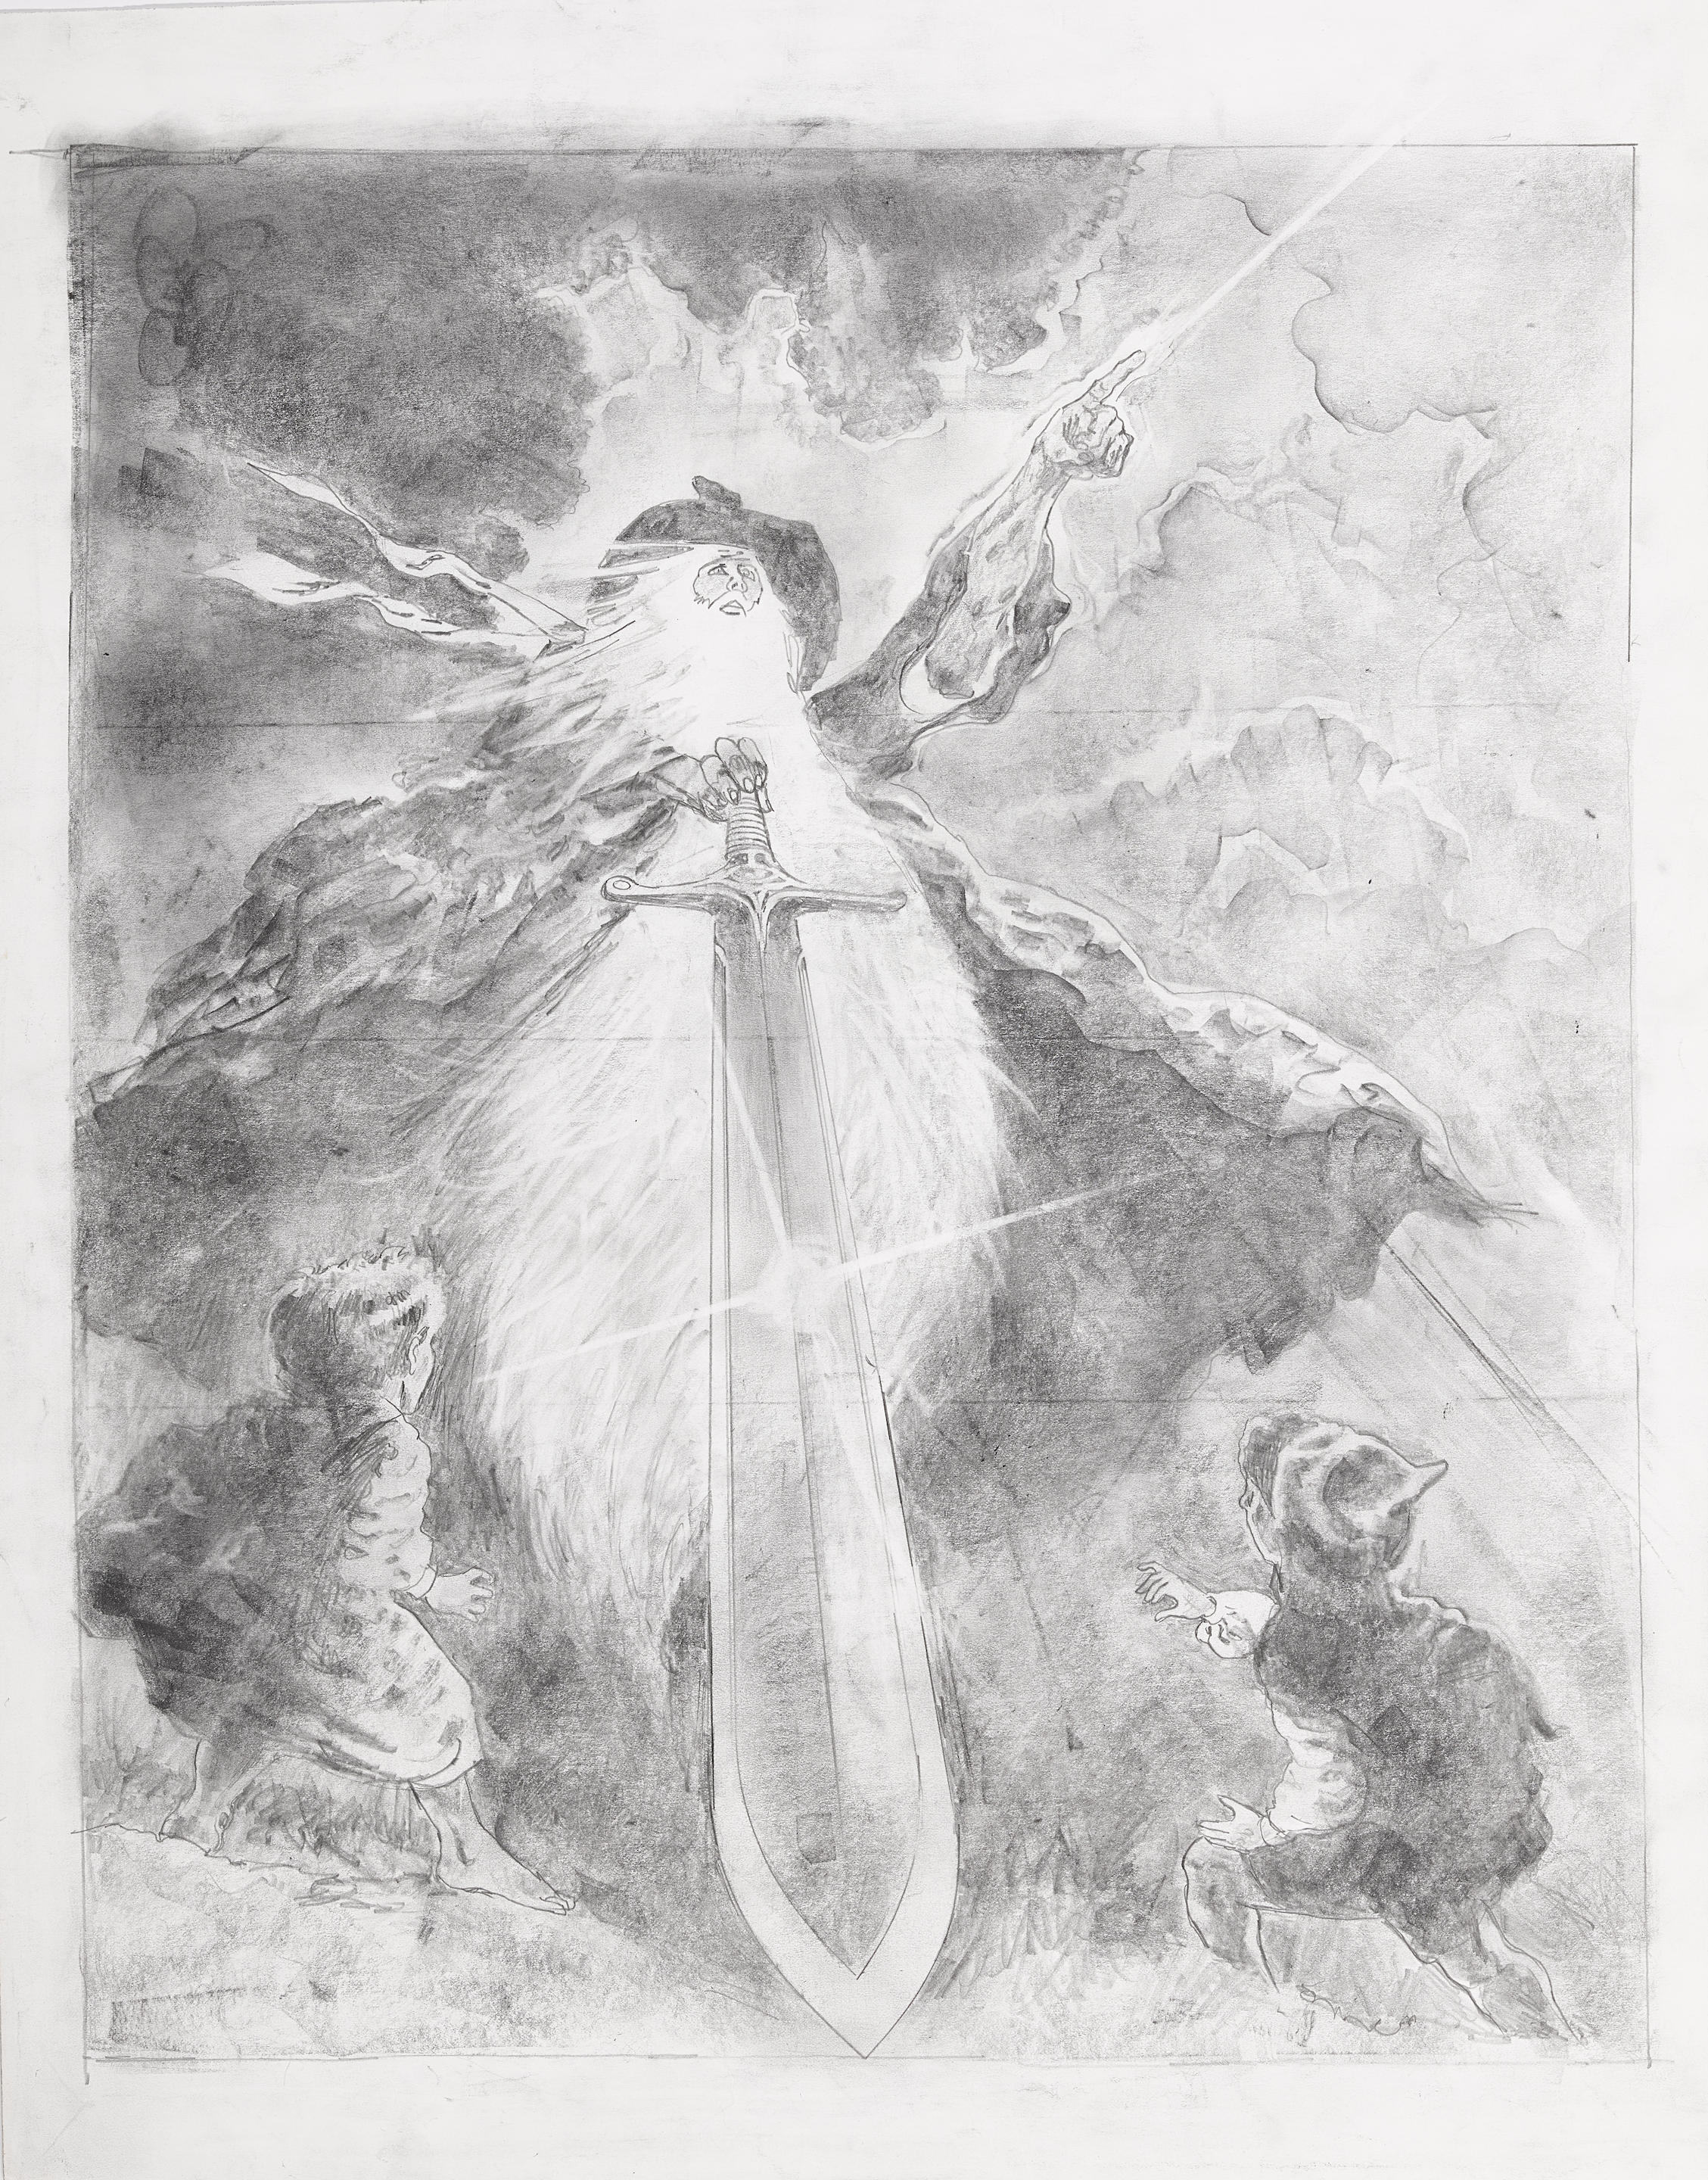 A Tom Jung Lord of the Rings key art illustration for the one sheet poster